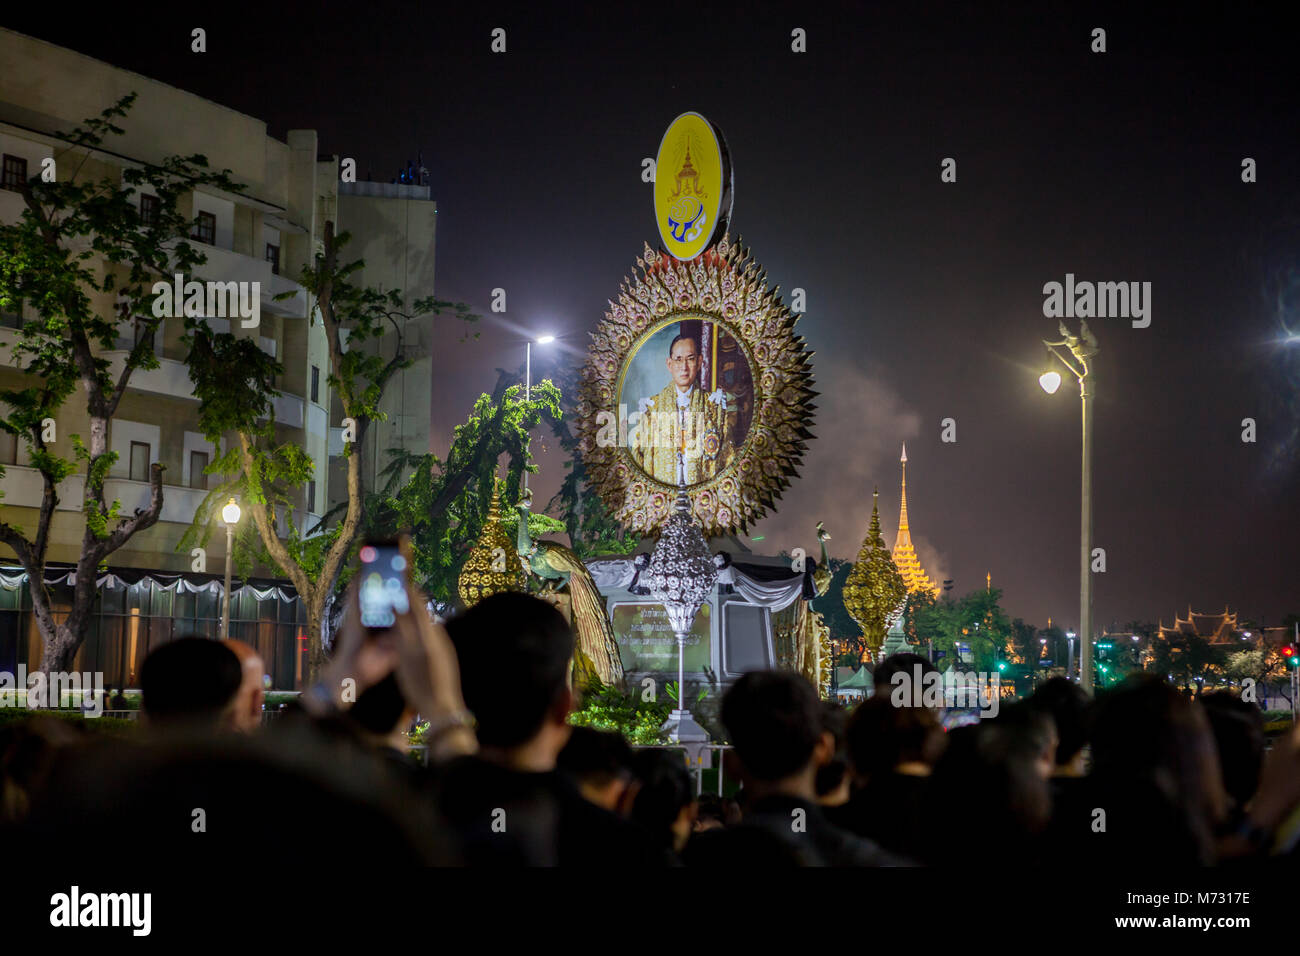 Ashes of king Bhumibol Adulyadej coming out of the stupa at Sanam Luang. View among people at Ratchadamnoen Road, with image of the king in the street Stock Photo